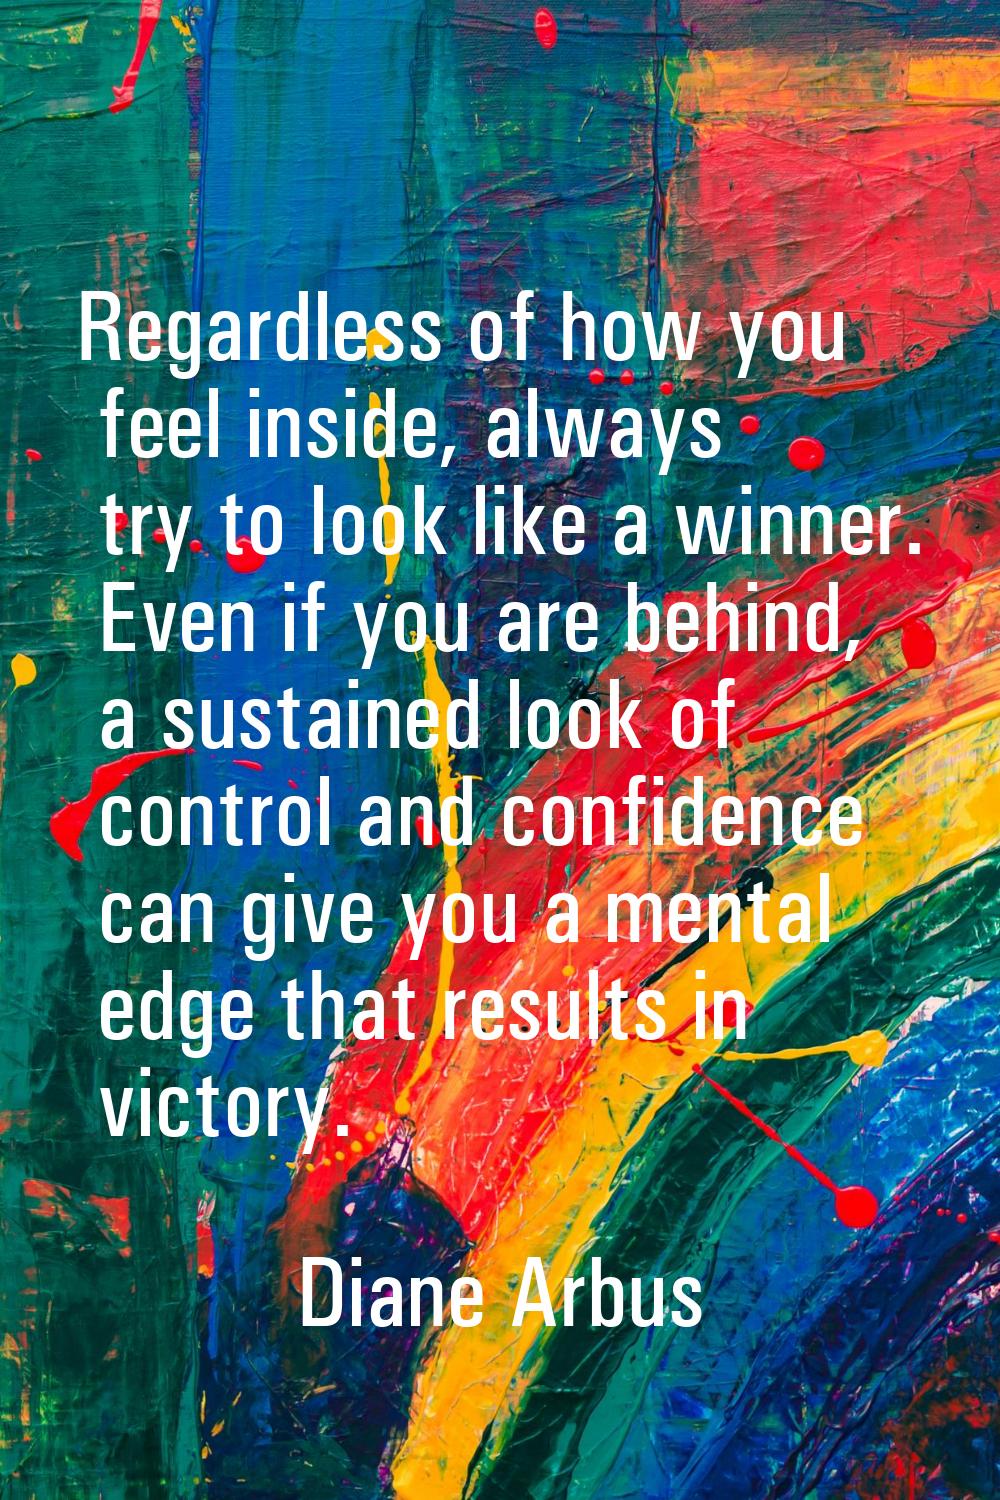 Regardless of how you feel inside, always try to look like a winner. Even if you are behind, a sust